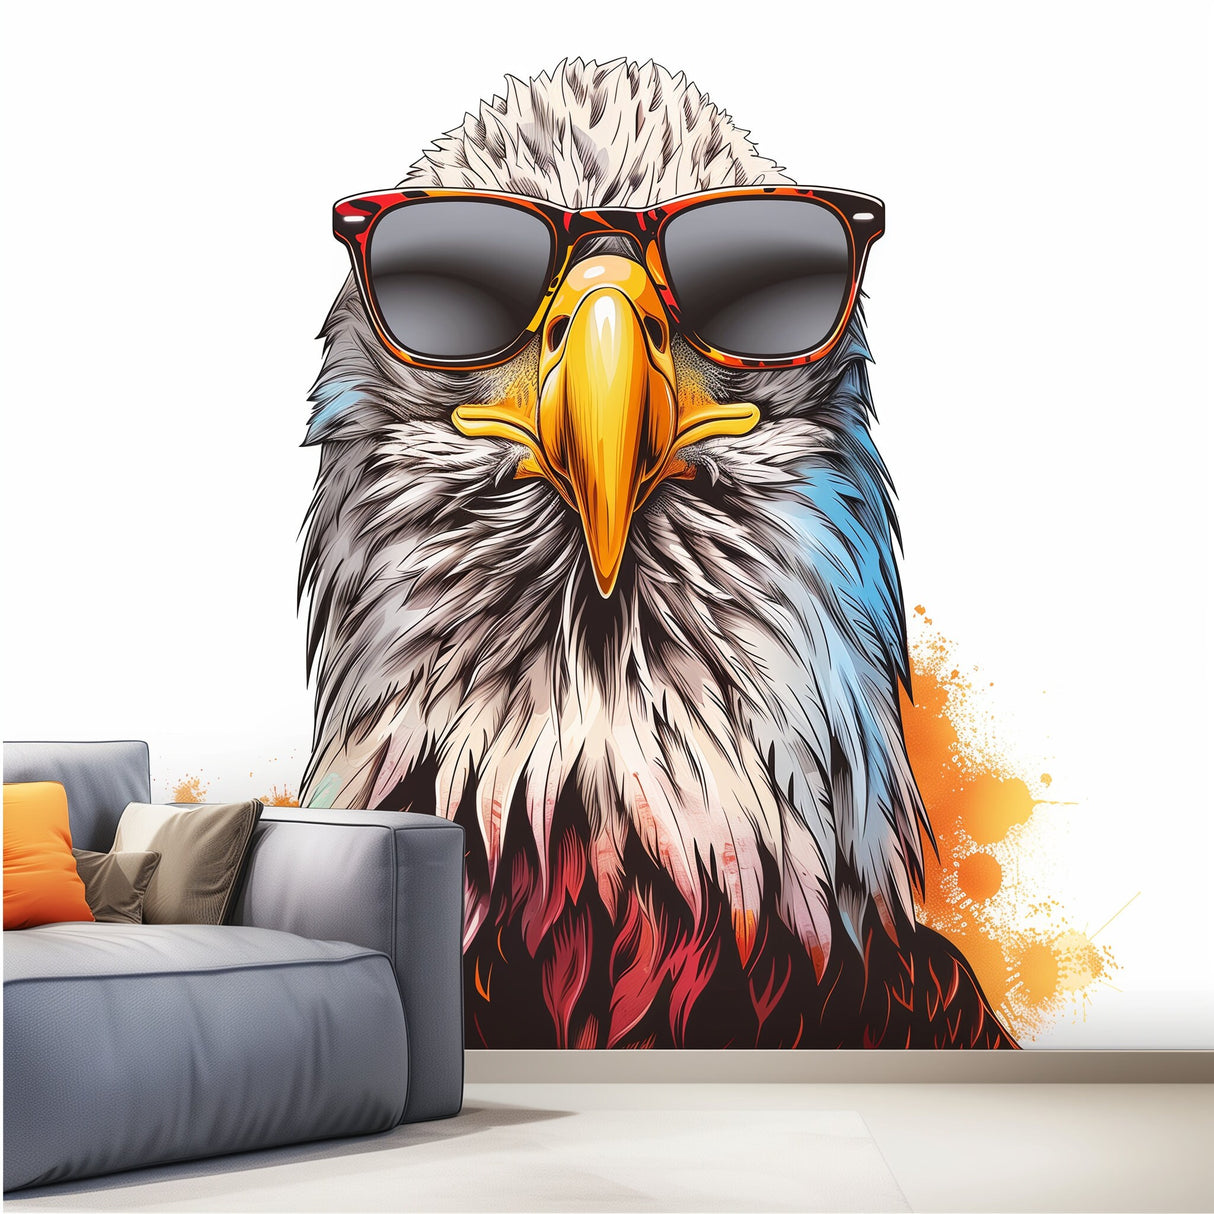 Bald Eagle with Sunglasses Wall Sticker Decal - Cool Bird in Glasses Room Decor - Easy-to-Apply Eagle Wall Art Sticker for Unique Room Decal